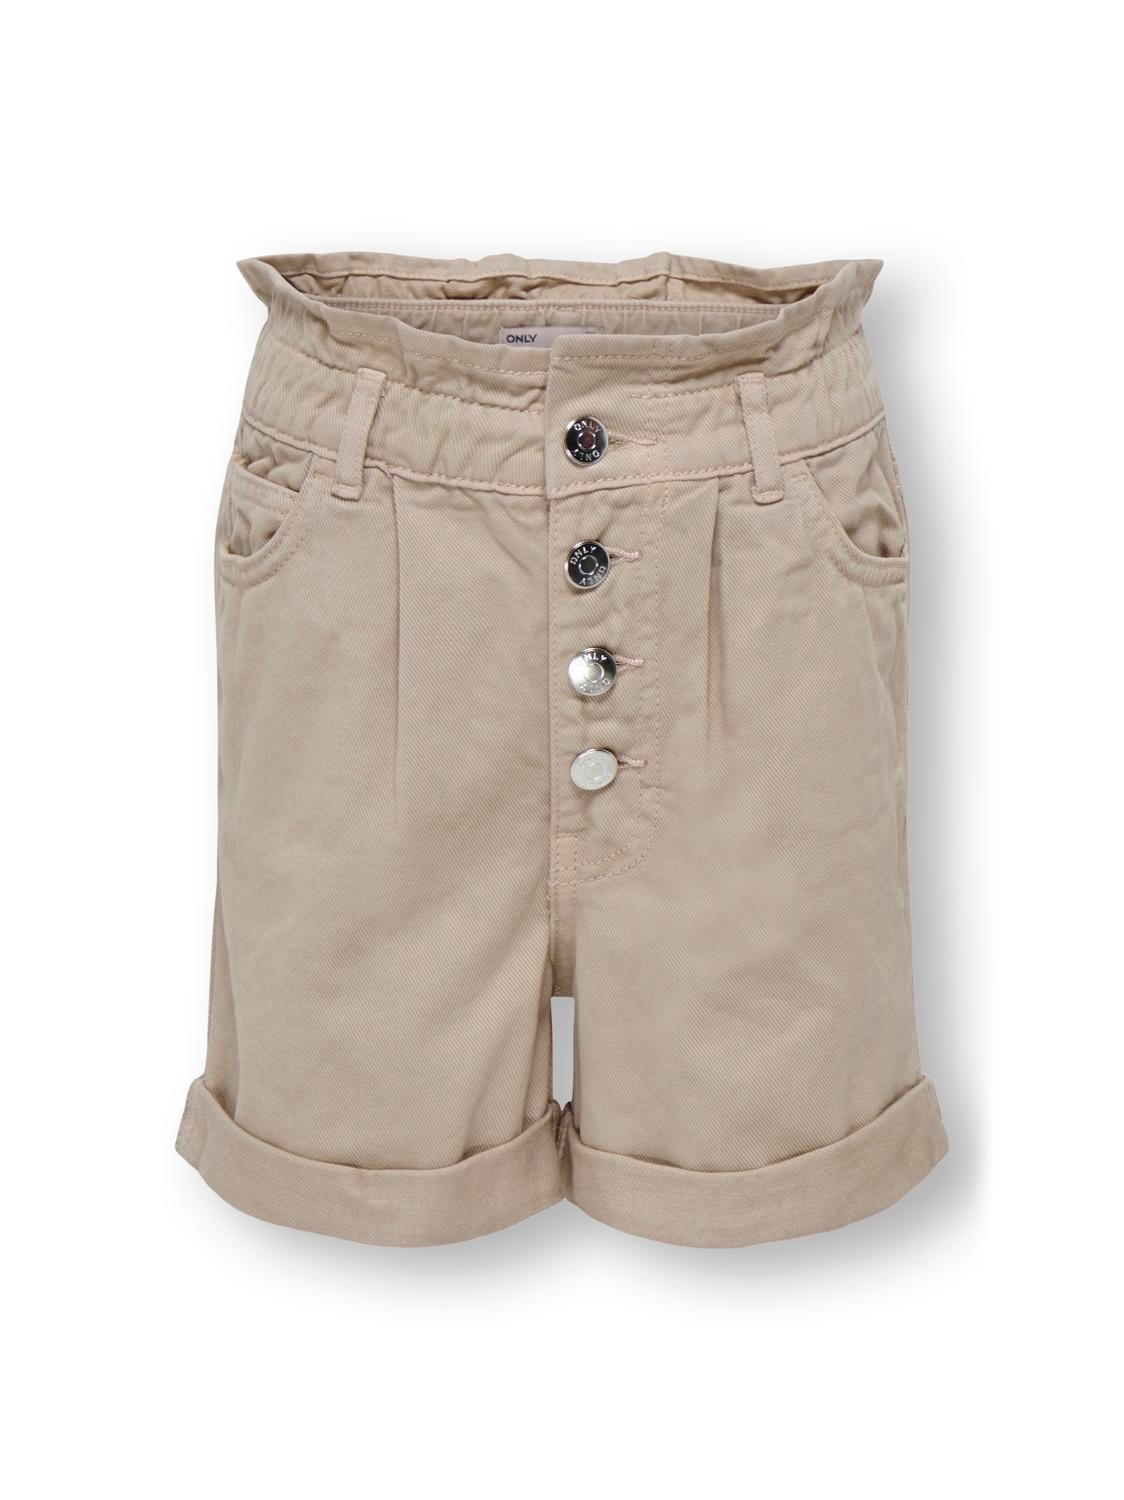 ONLY Paperbag shorts -Oxford Tan - 15293657